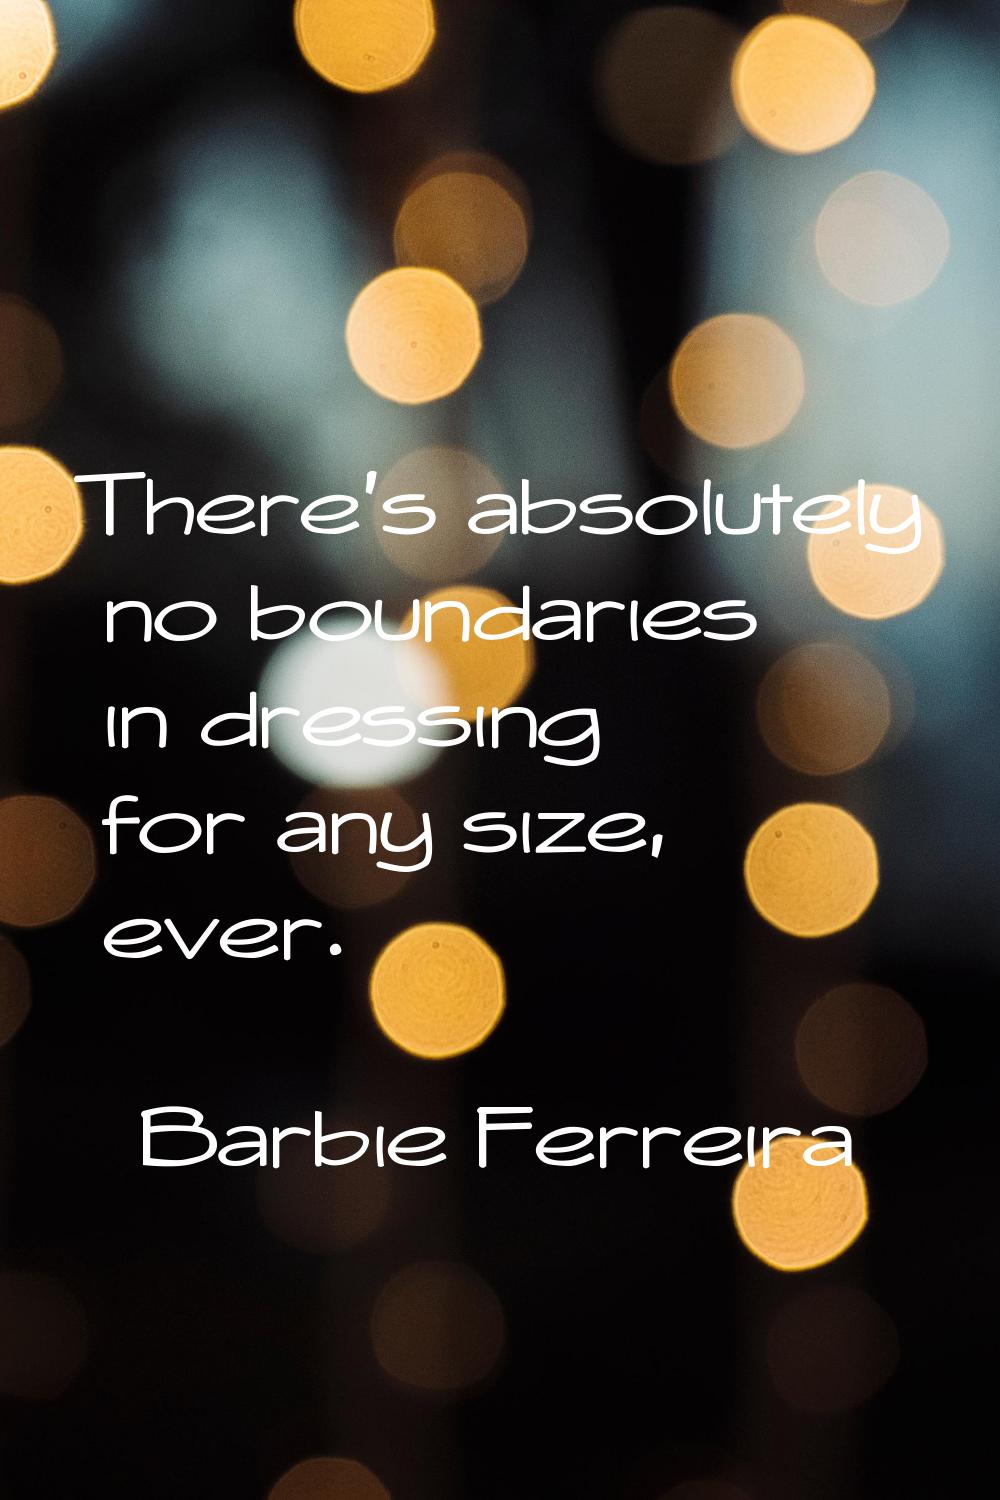 There's absolutely no boundaries in dressing for any size, ever.